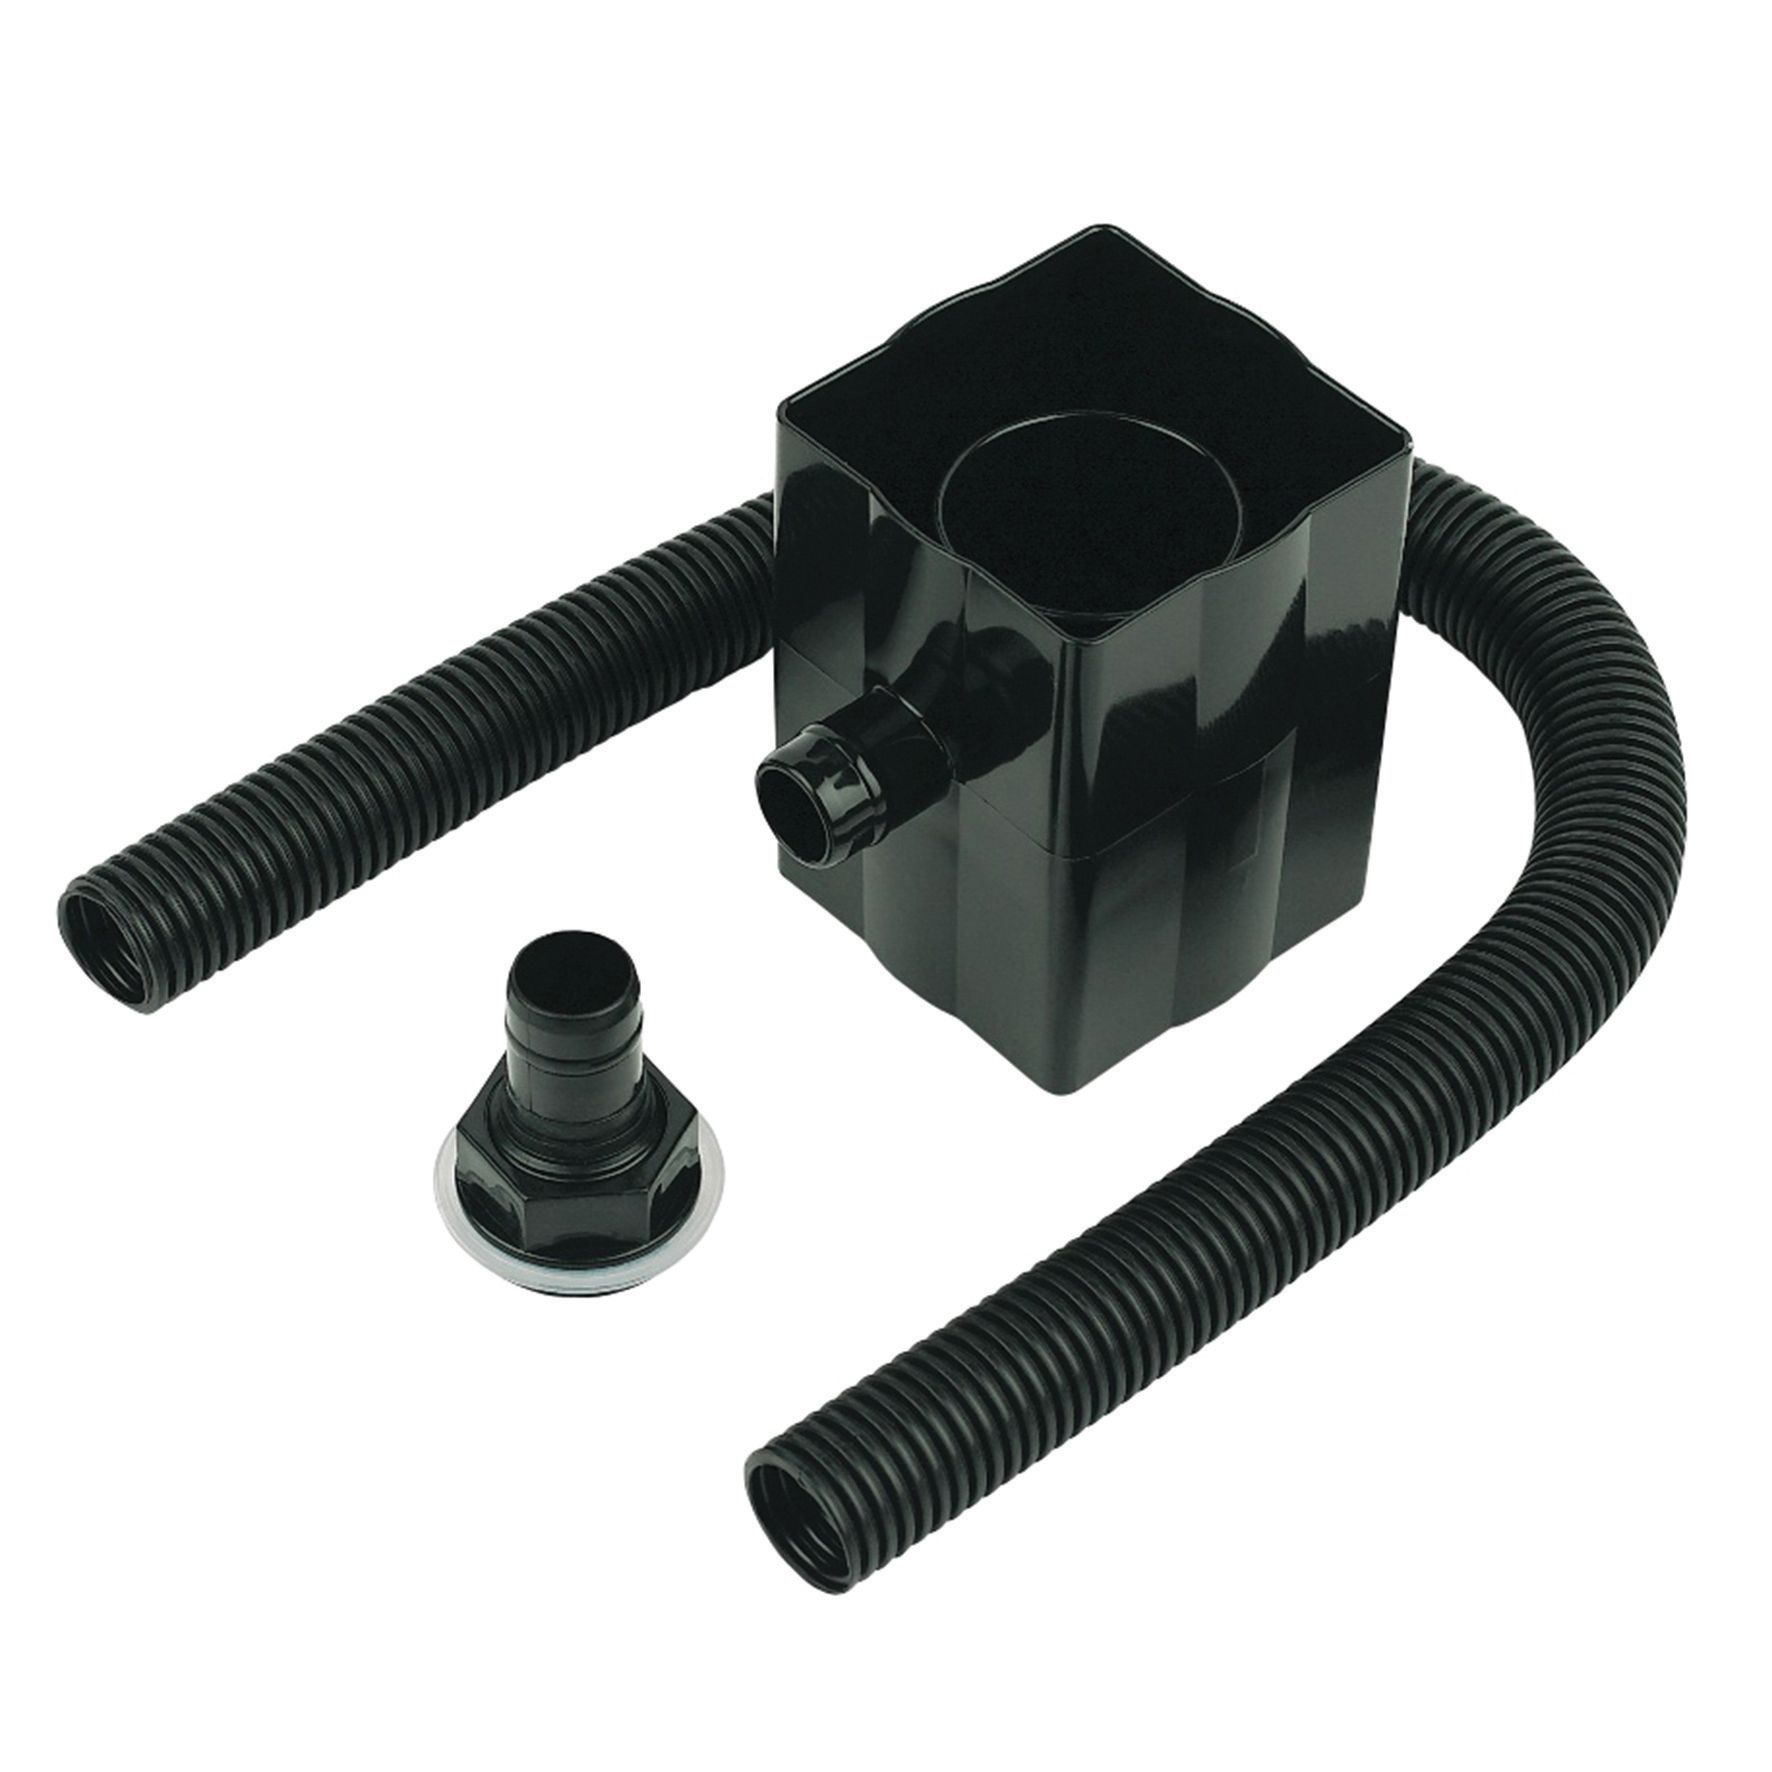 Image of Floplast 68mm Round or 65mm Square Downpipe Water Butt Rain Diverter - Black